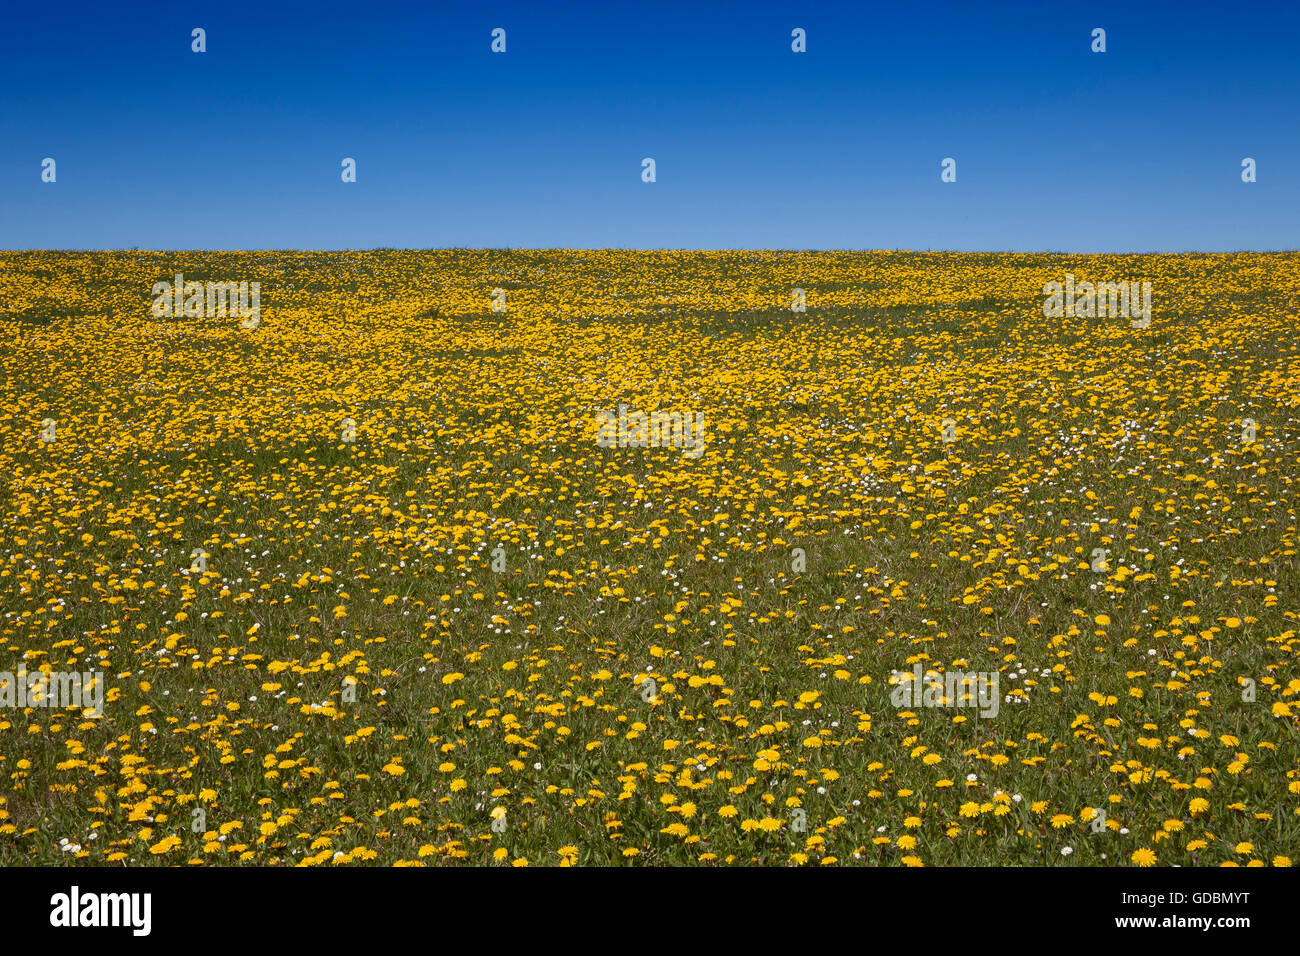 Meadow with dandelions (Taraxacum officinale) in spring, Schleswig Holstein, Sylt, Germany, Europe Stock Photo